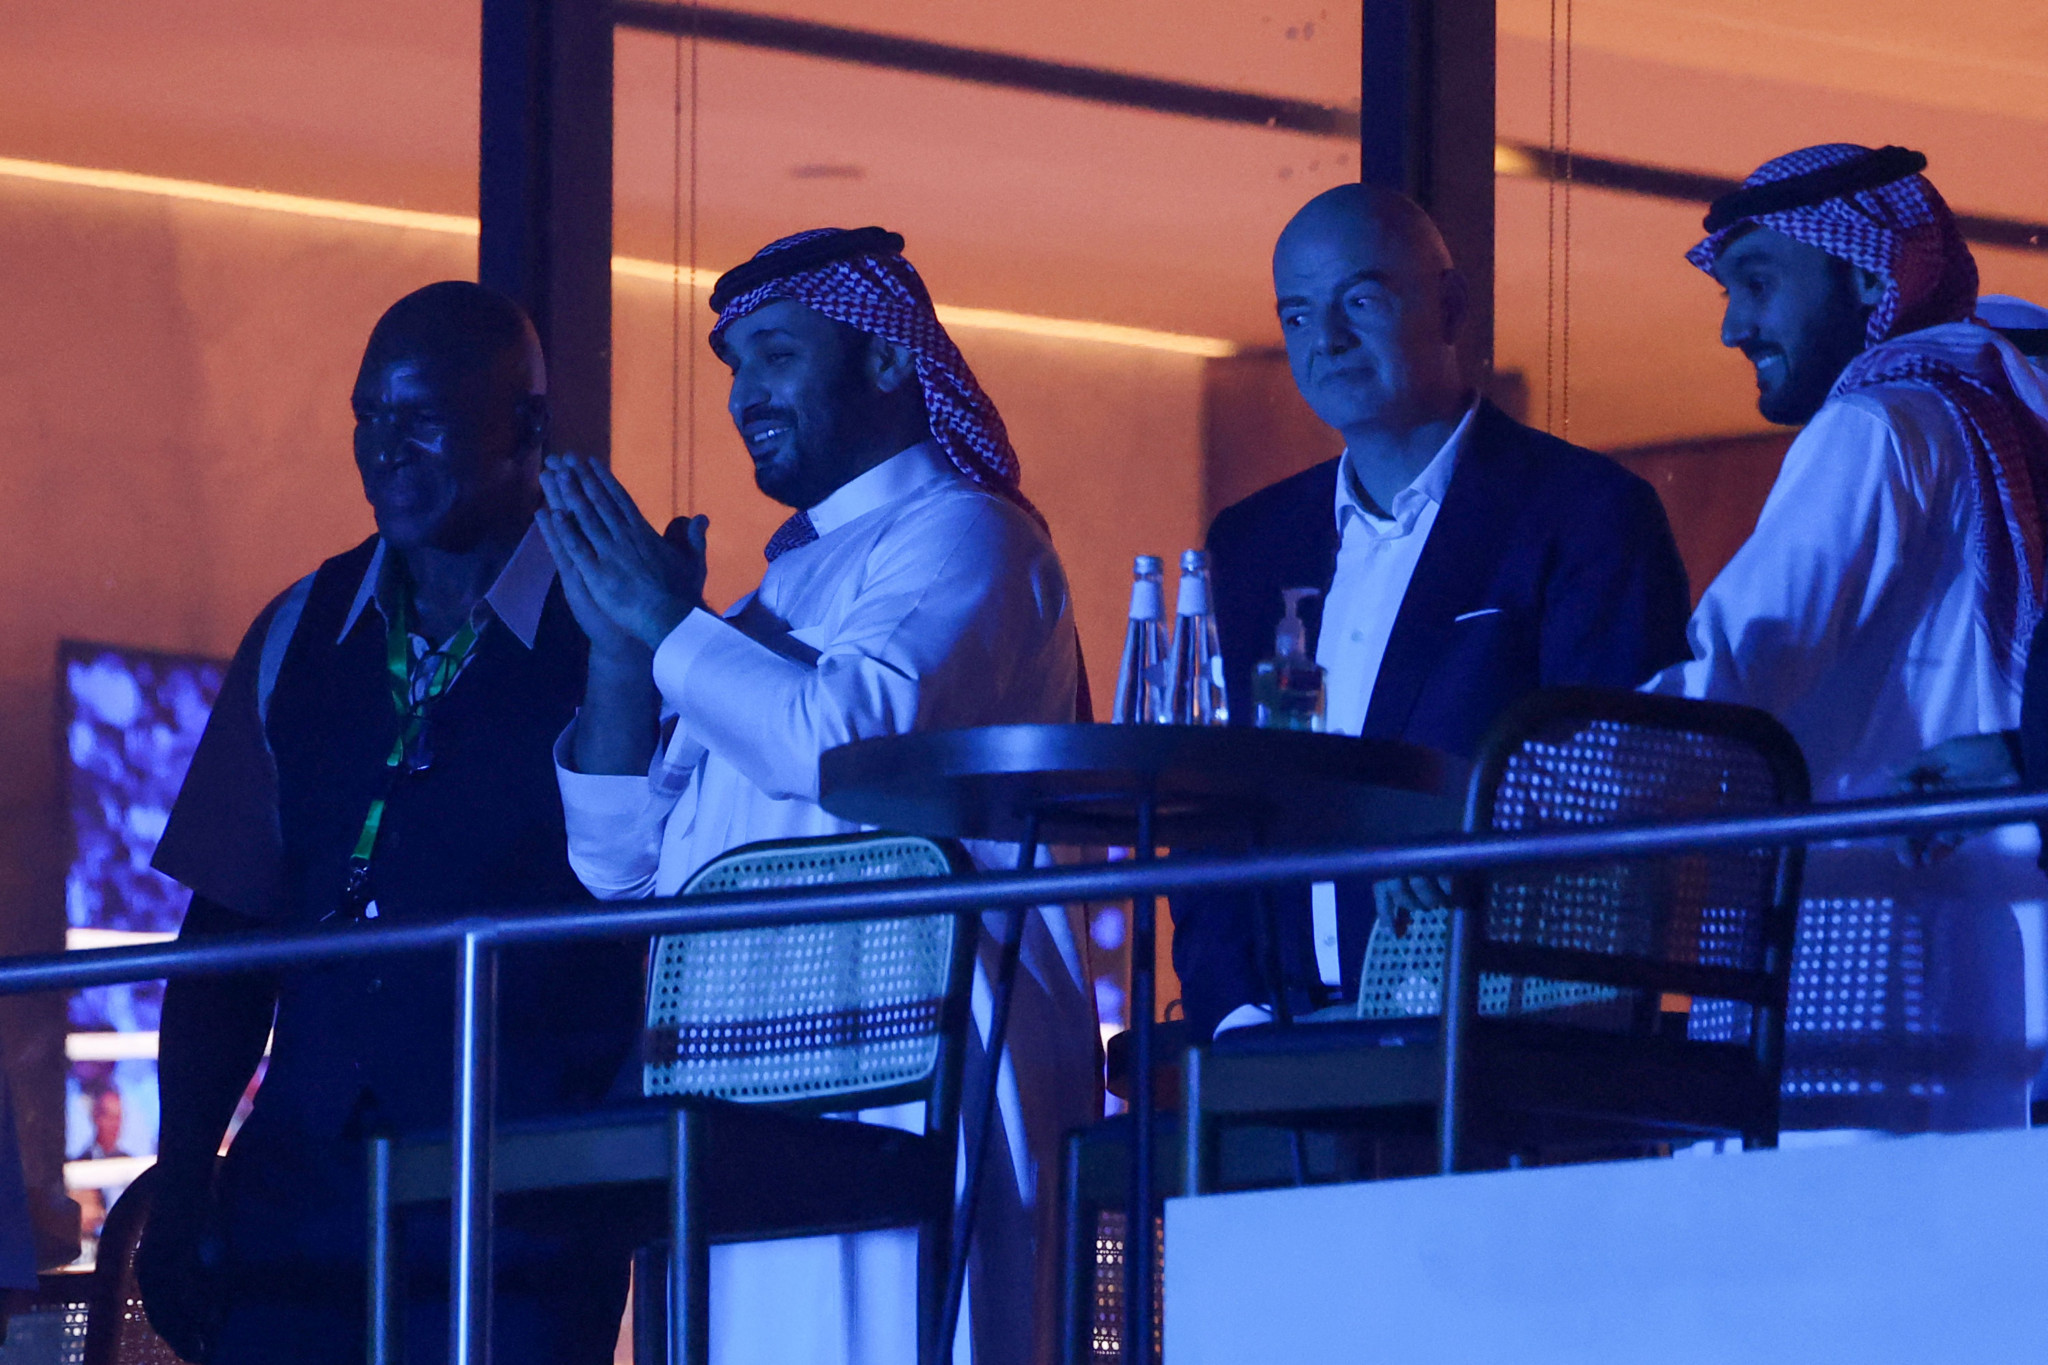 FIFA President Gianni Infantino watched the fight between Oleksandr Usyk and Anthony Joshua in Jeddah along with Crown Prince Mohammed bin Salman Al Saud ©Getty Images